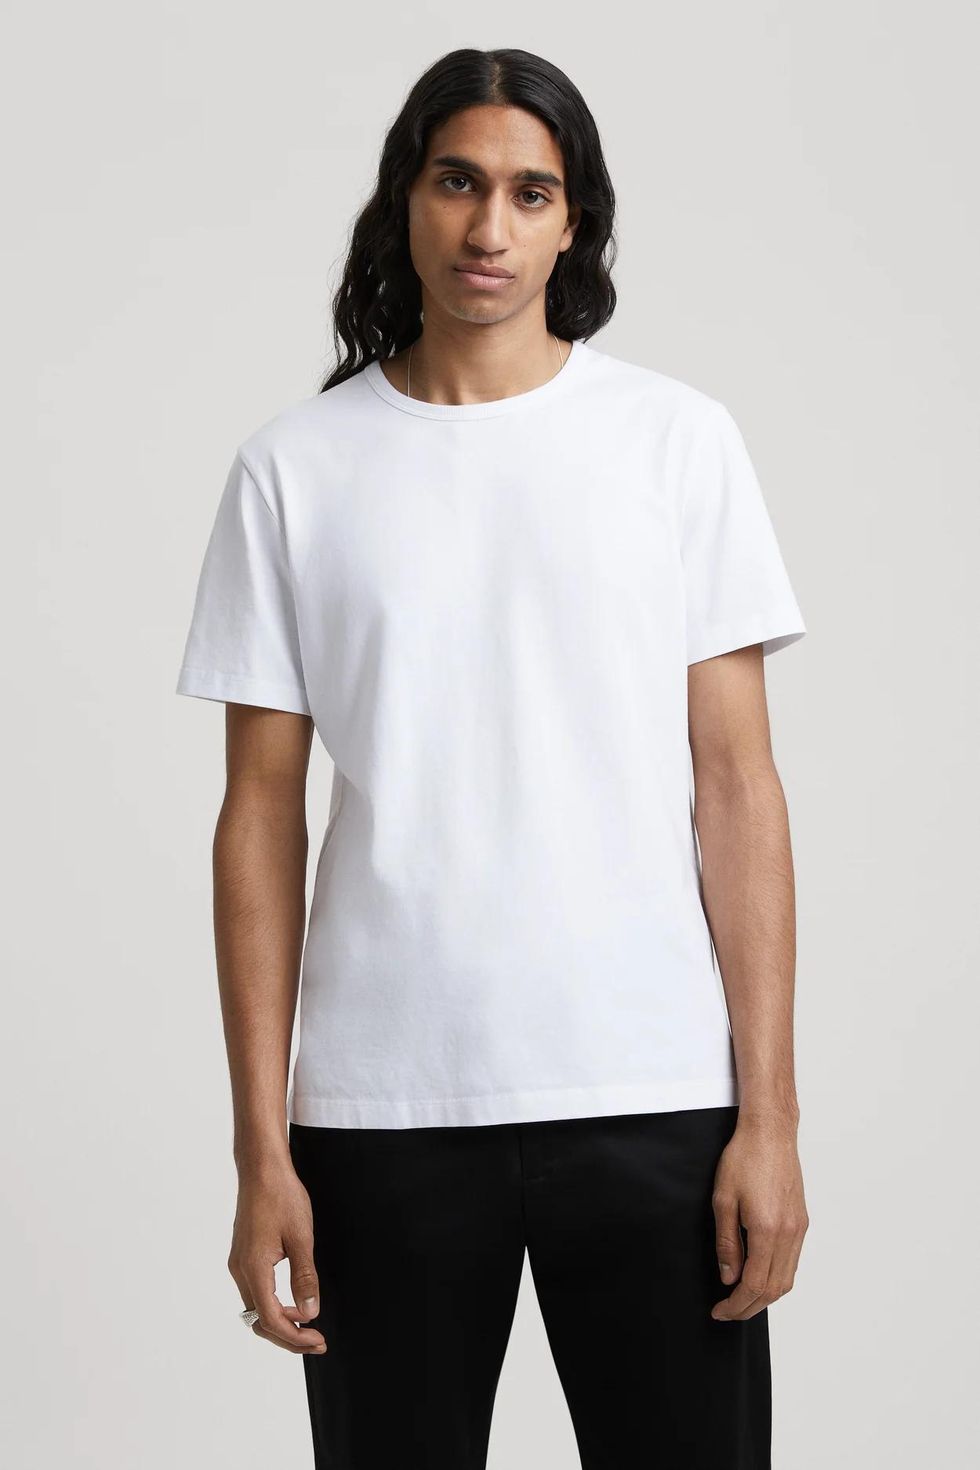 The best white shirts for men in 2023